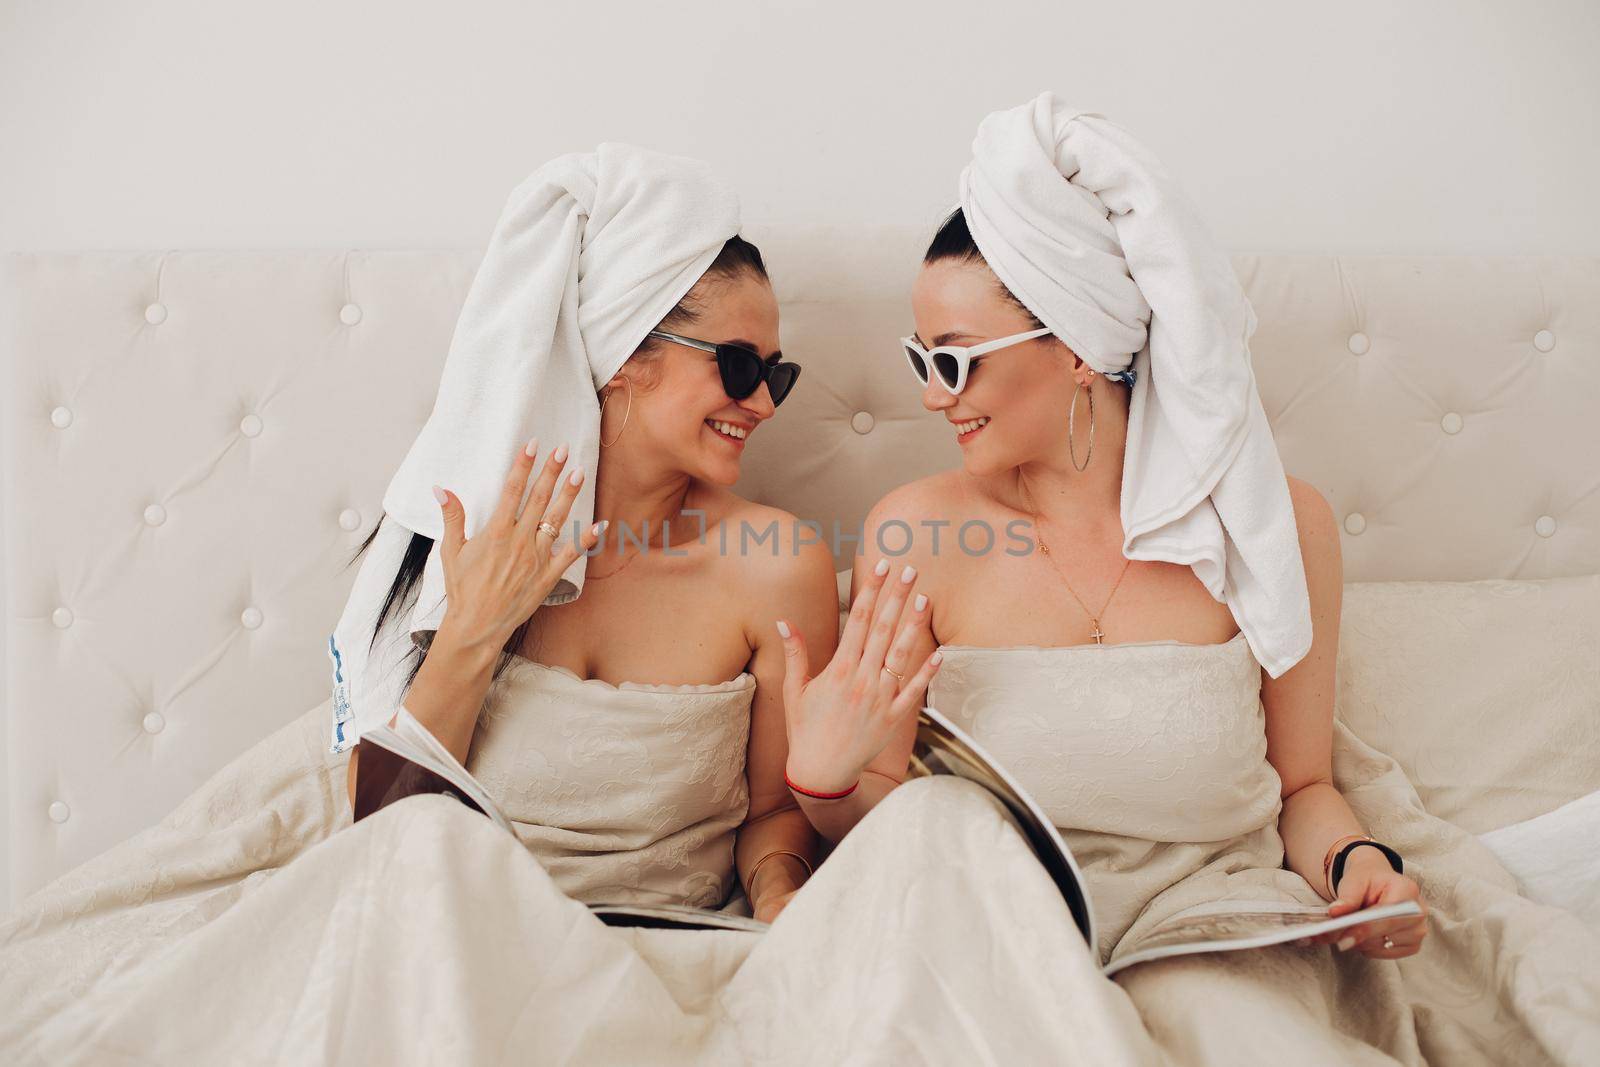 Two happy glamour woman friend wearing towel relaxing together. Fashion smiling girl in sunglasses sitting on bed in bedroom holding magazine enjoying having good time indoor medium shot